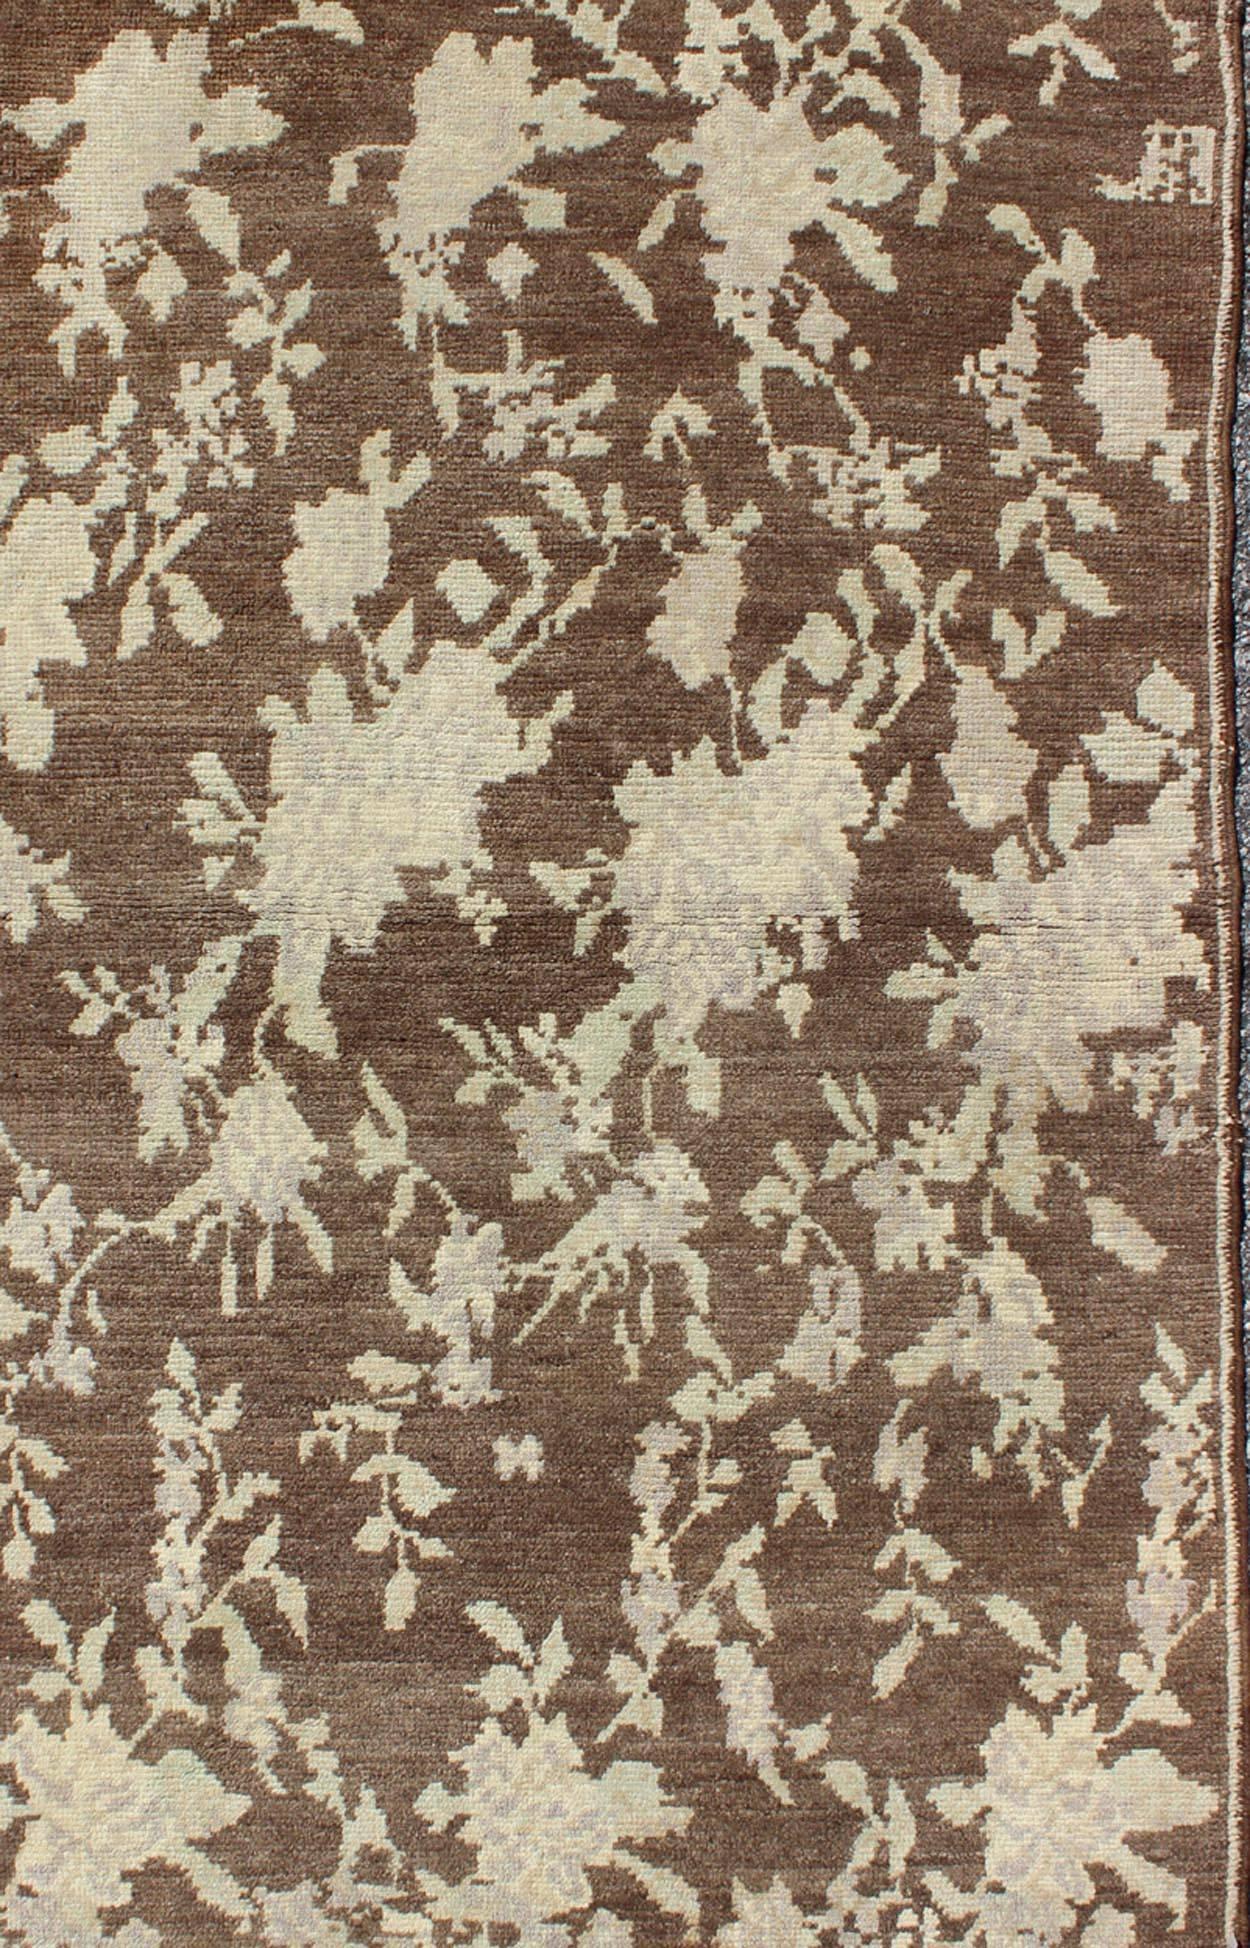 Mocha Vintage Turkish Oushak Rug with Free-Flowing Green & Cream Flower Blossoms In Good Condition For Sale In Atlanta, GA